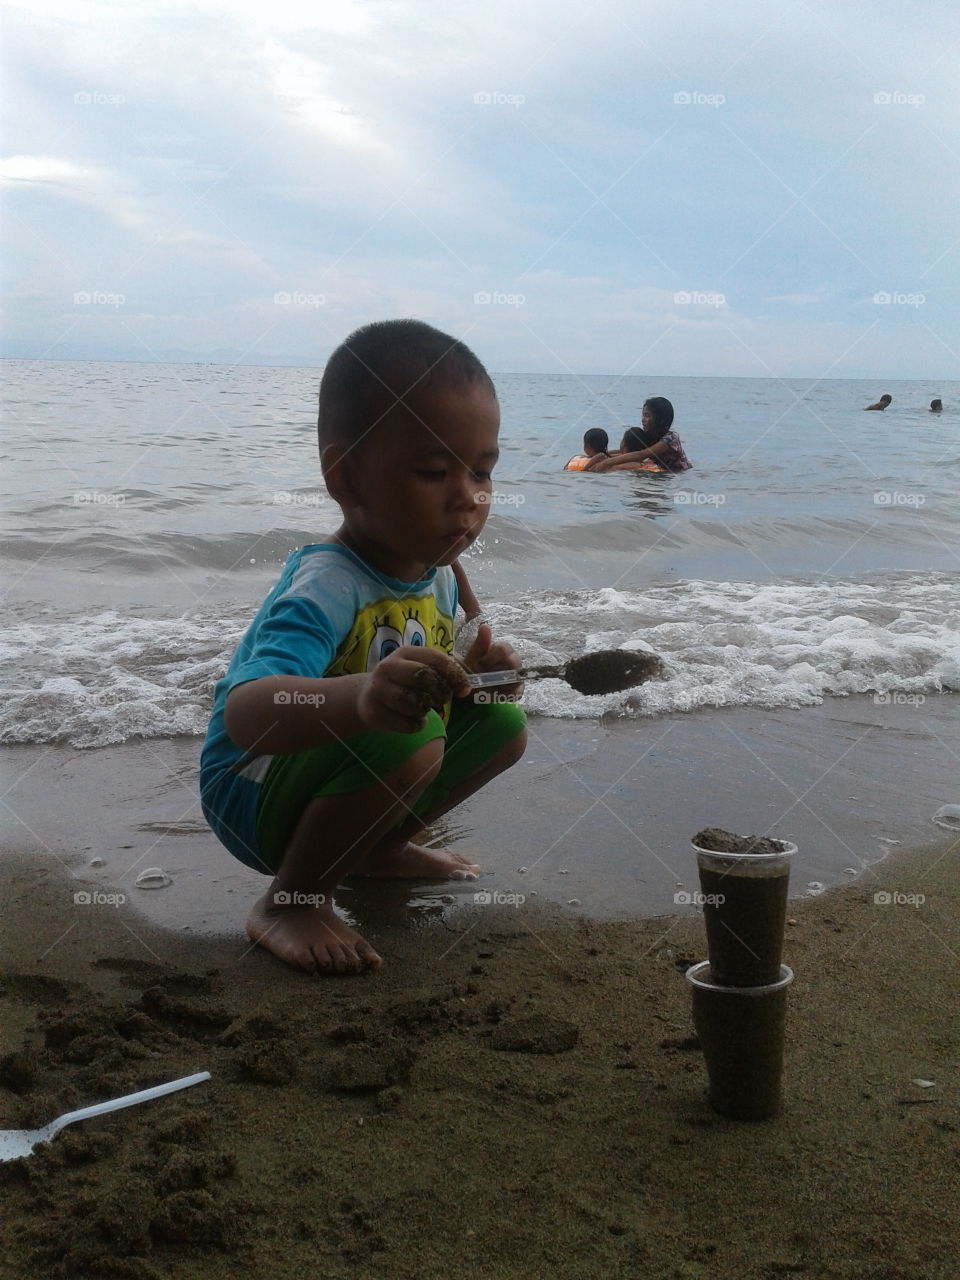 little boy in the beach
playing sand